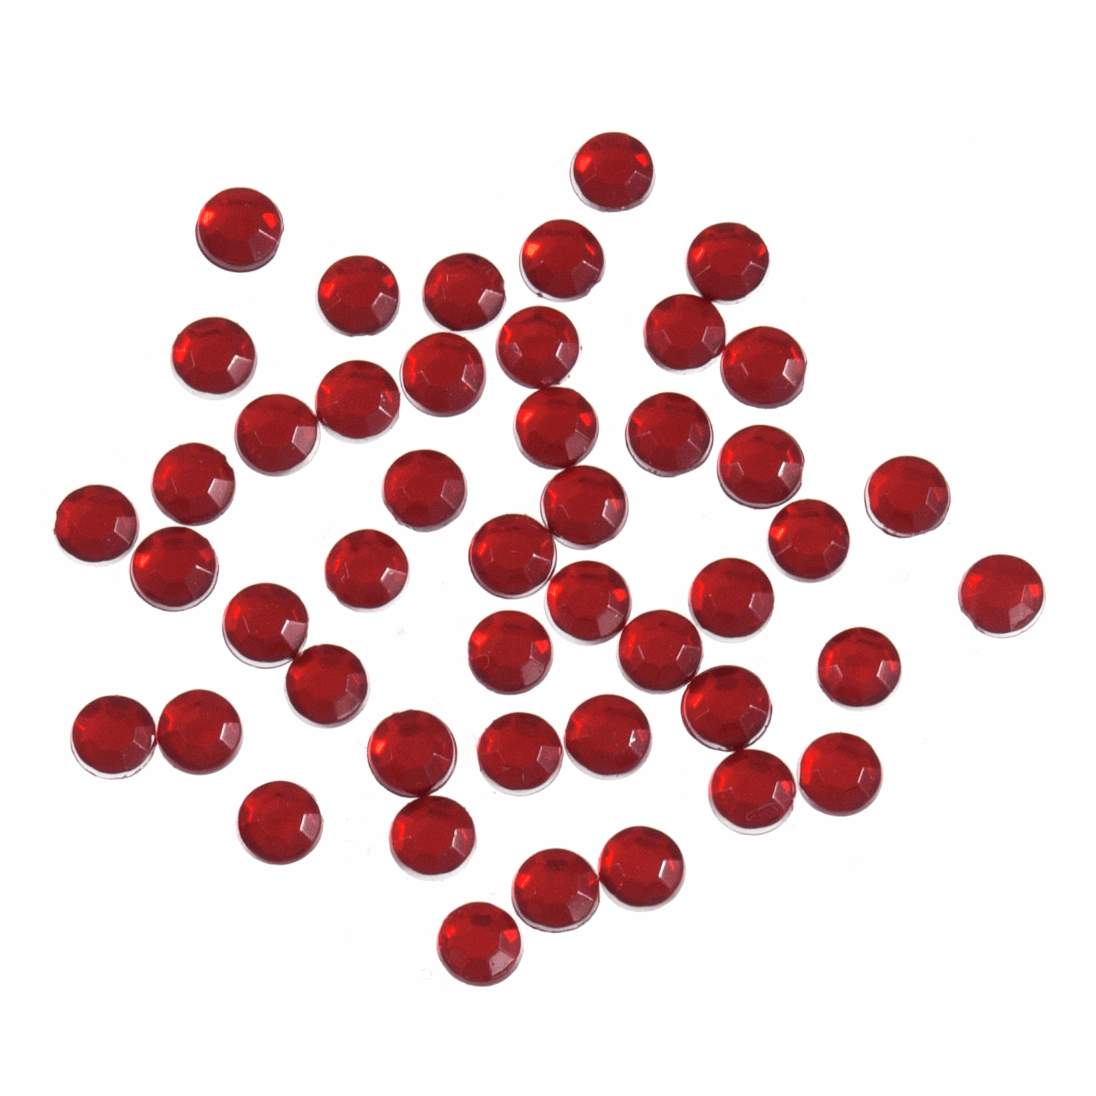 Acrylic Stones - Glue-On - Round - 4mm - Red (Trimits)